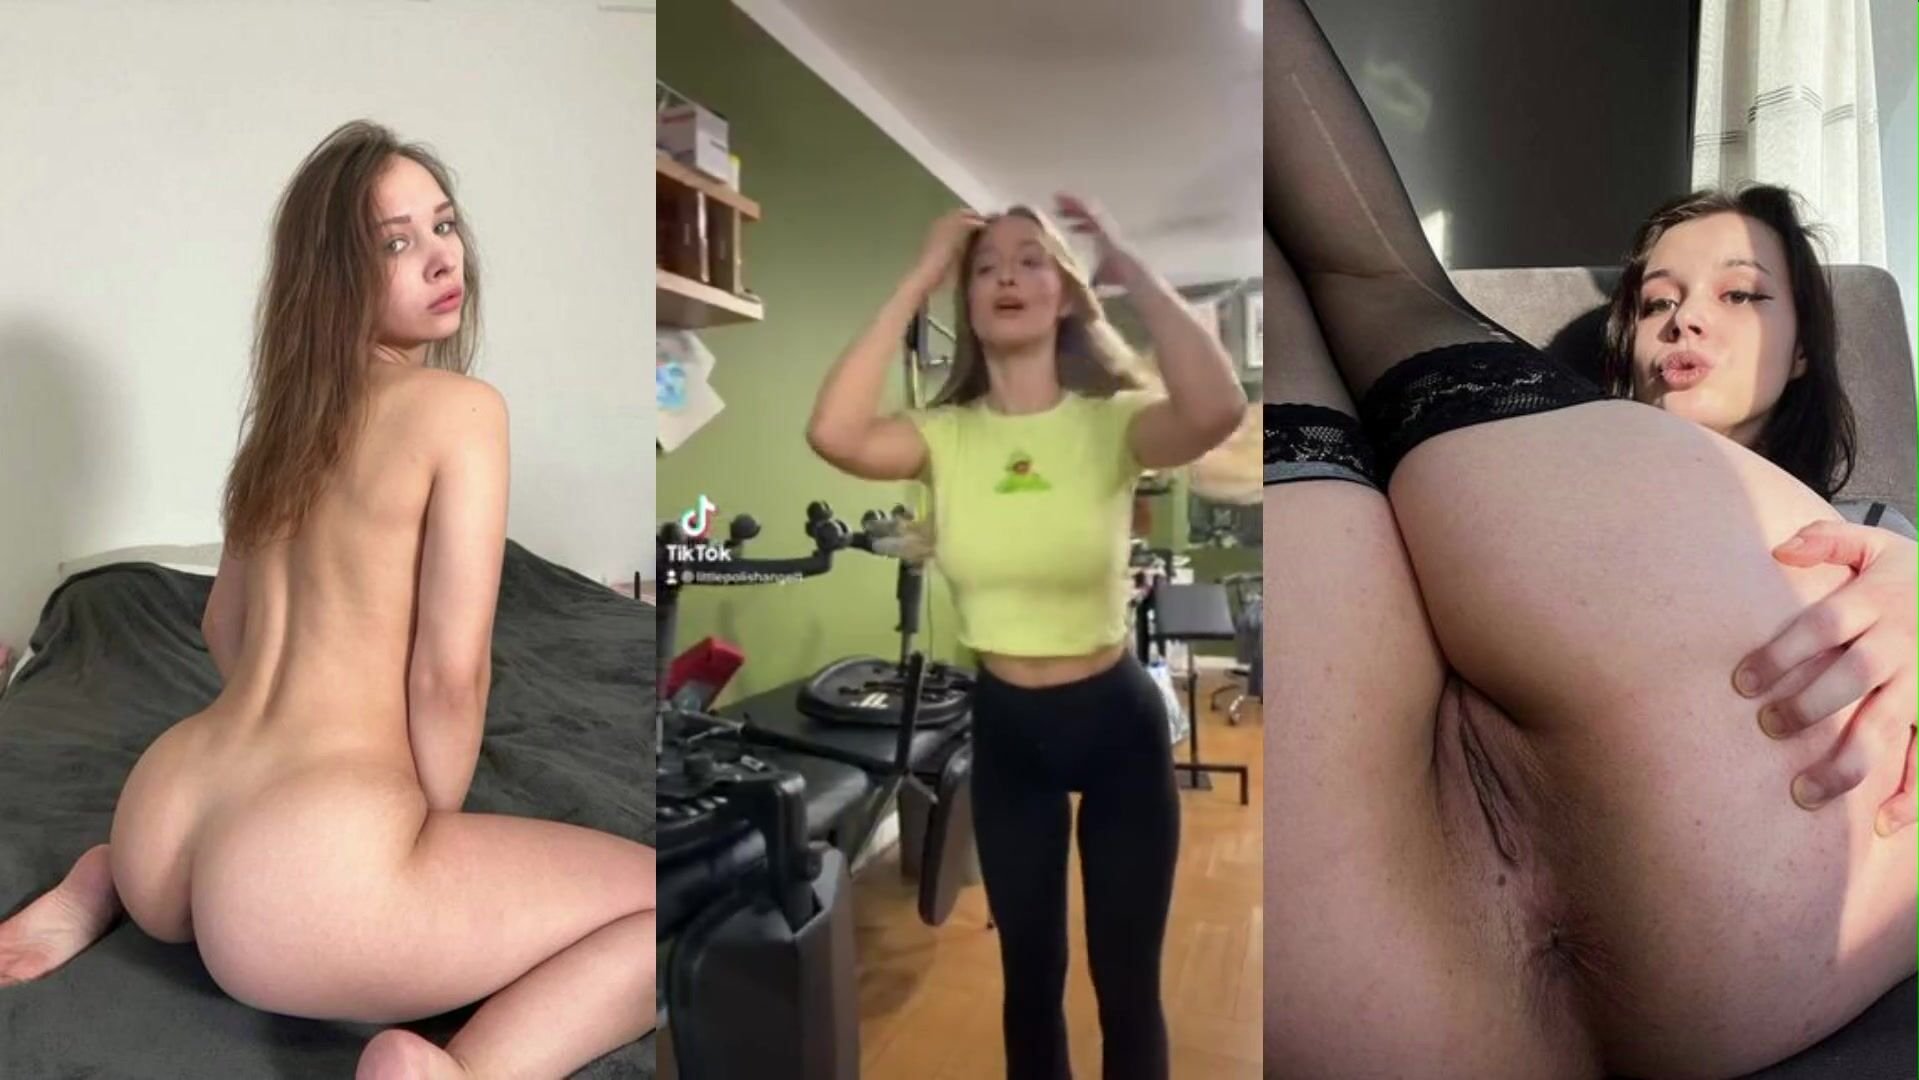 How to find nudes on tiktok